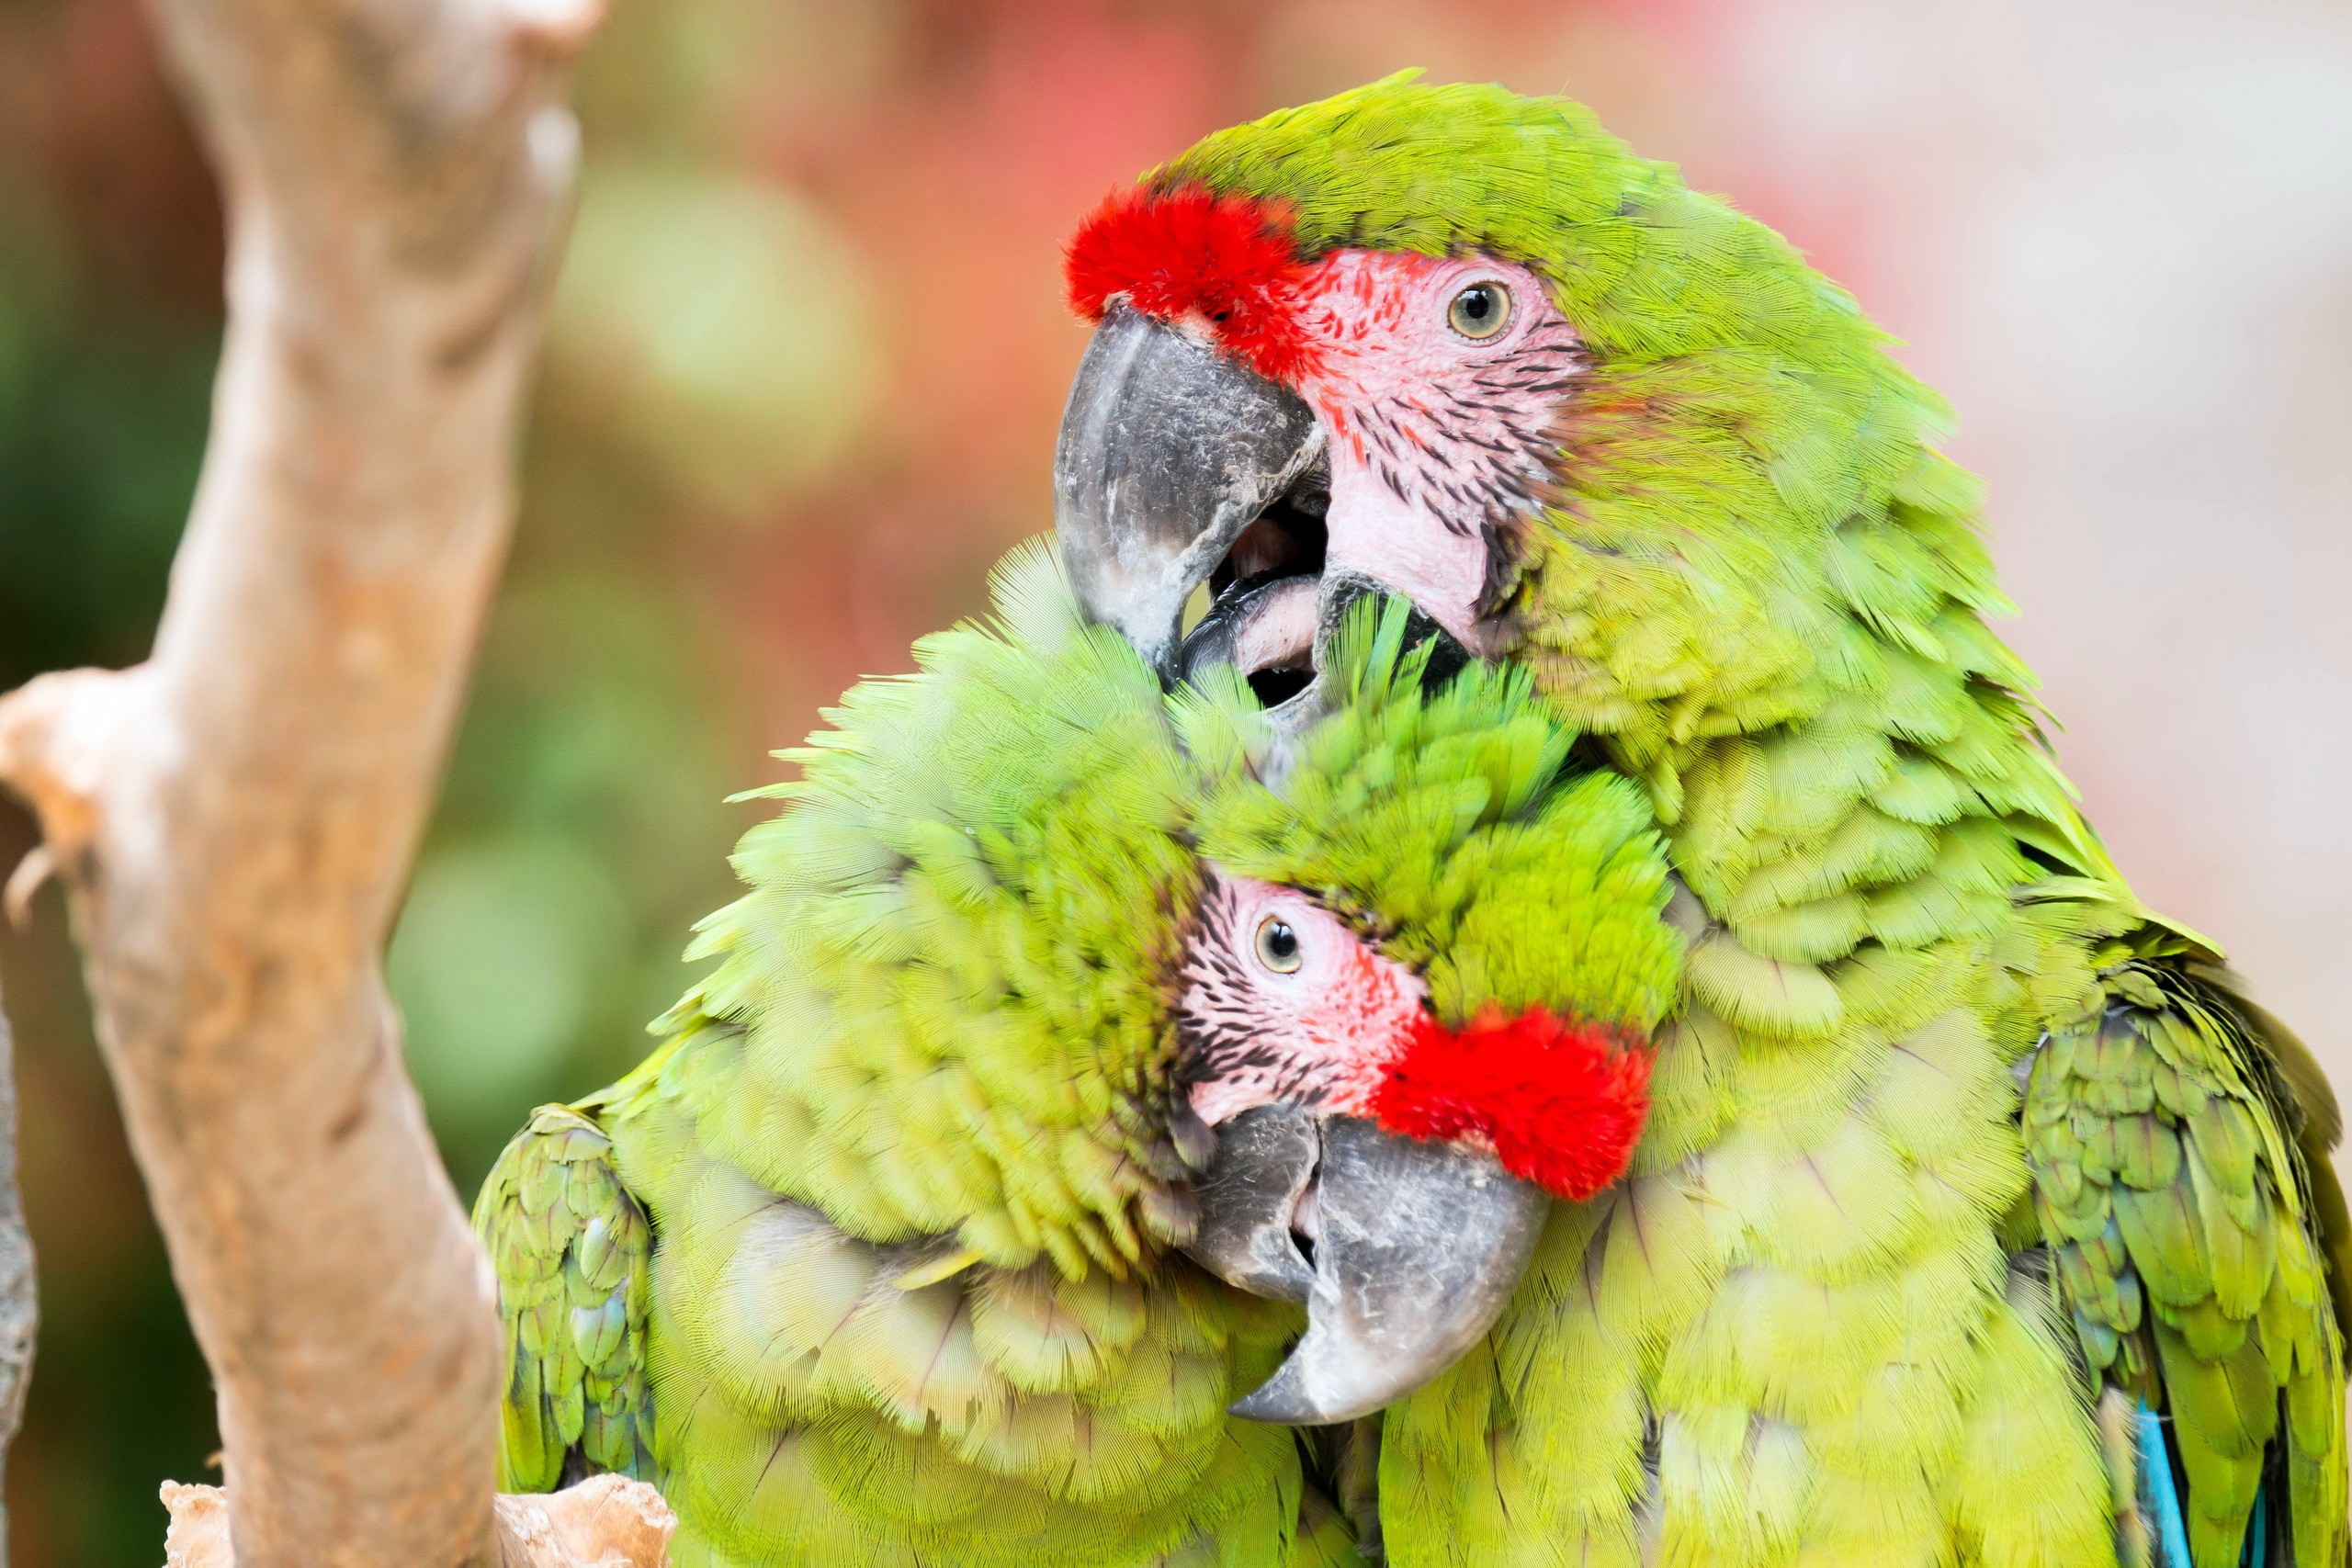 General 2560x1707 animals birds parrot colorful